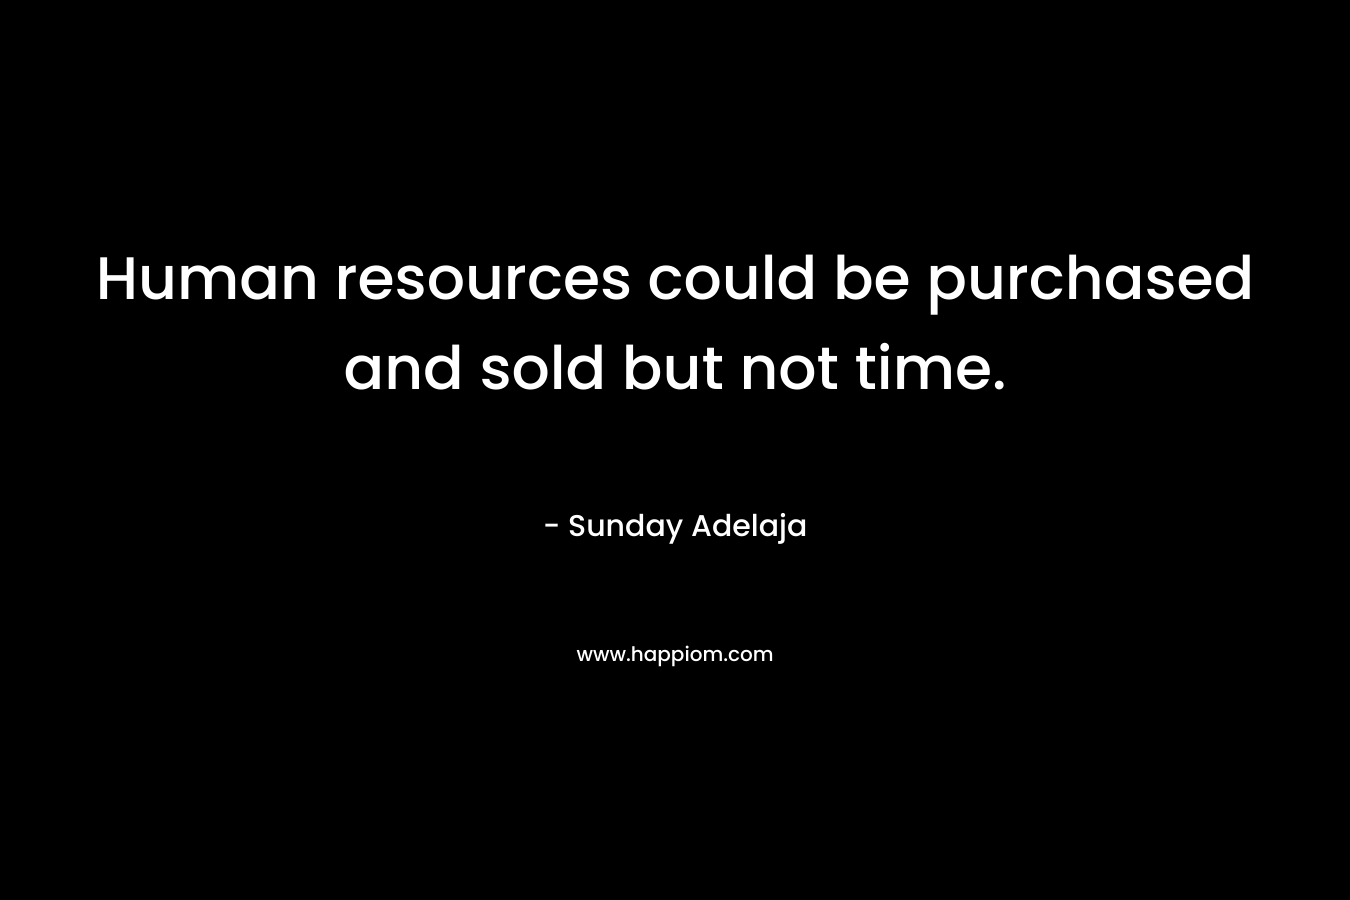 Human resources could be purchased and sold but not time.